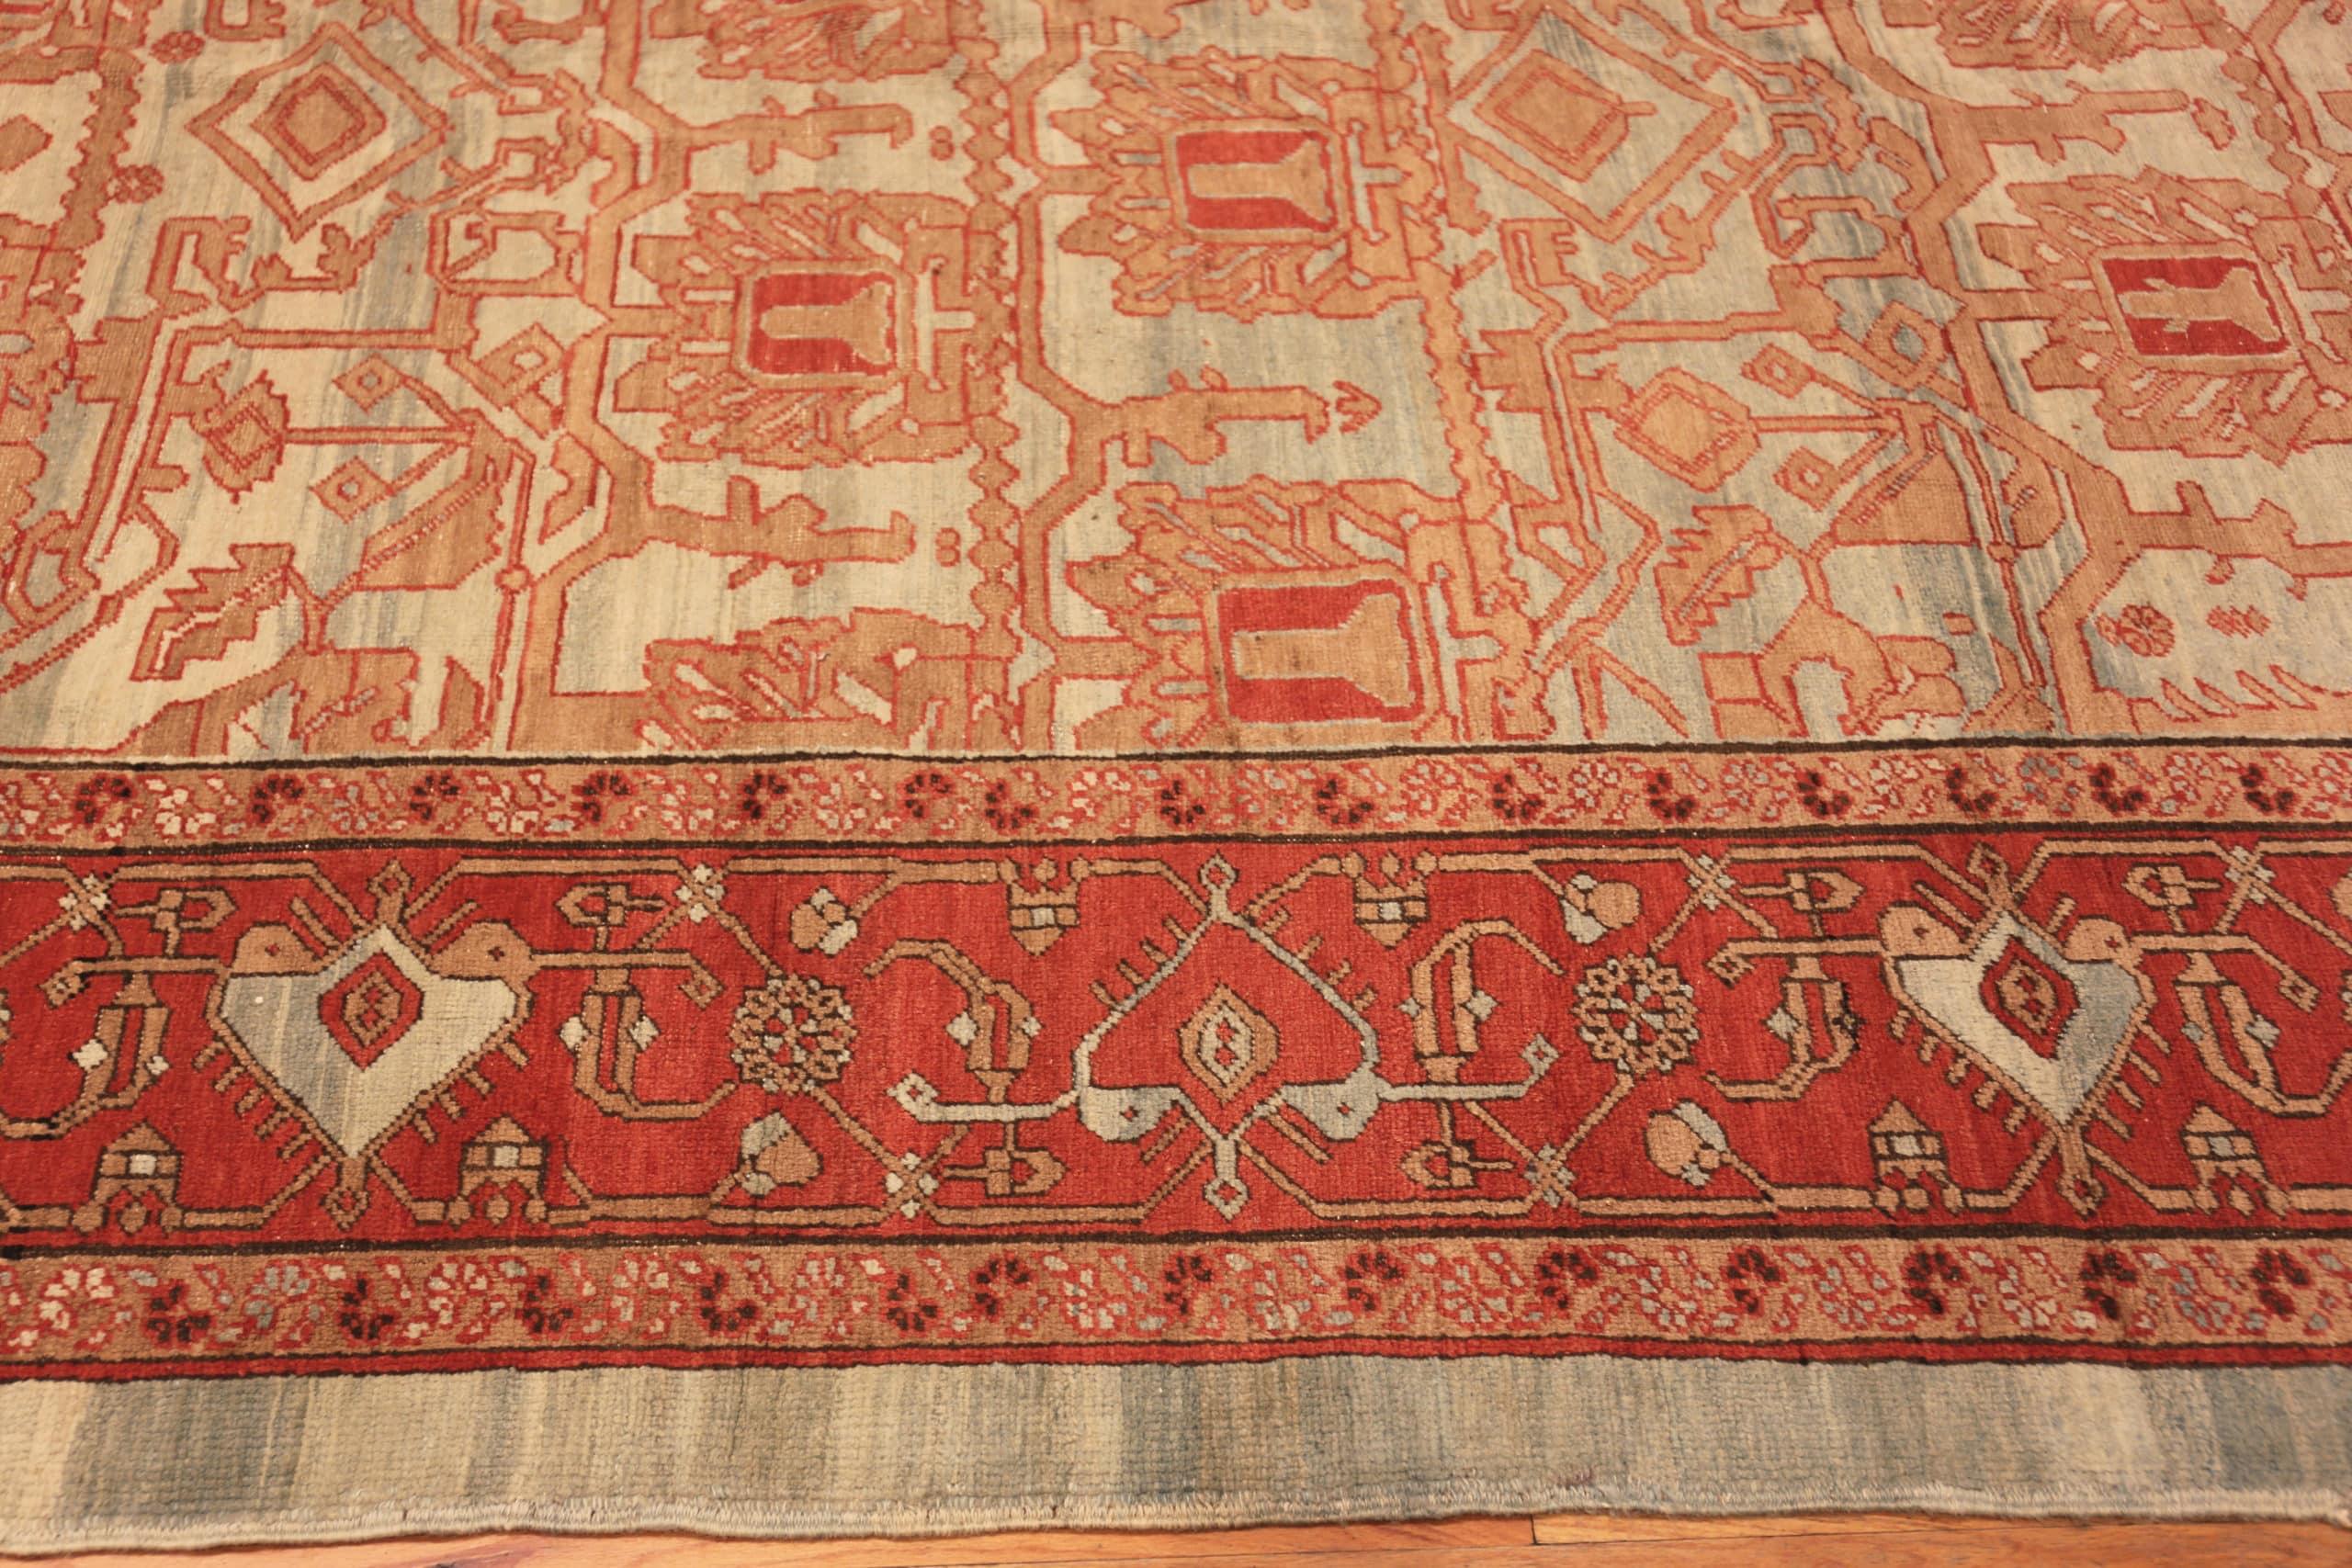 Antique Persian Bakshaish Rug, Country of Origin / rug type: Persian rug, Circa date: 1880. Size: 12 ft 8 in x 14 ft 8 in (3.86 m x 4.47 m)



